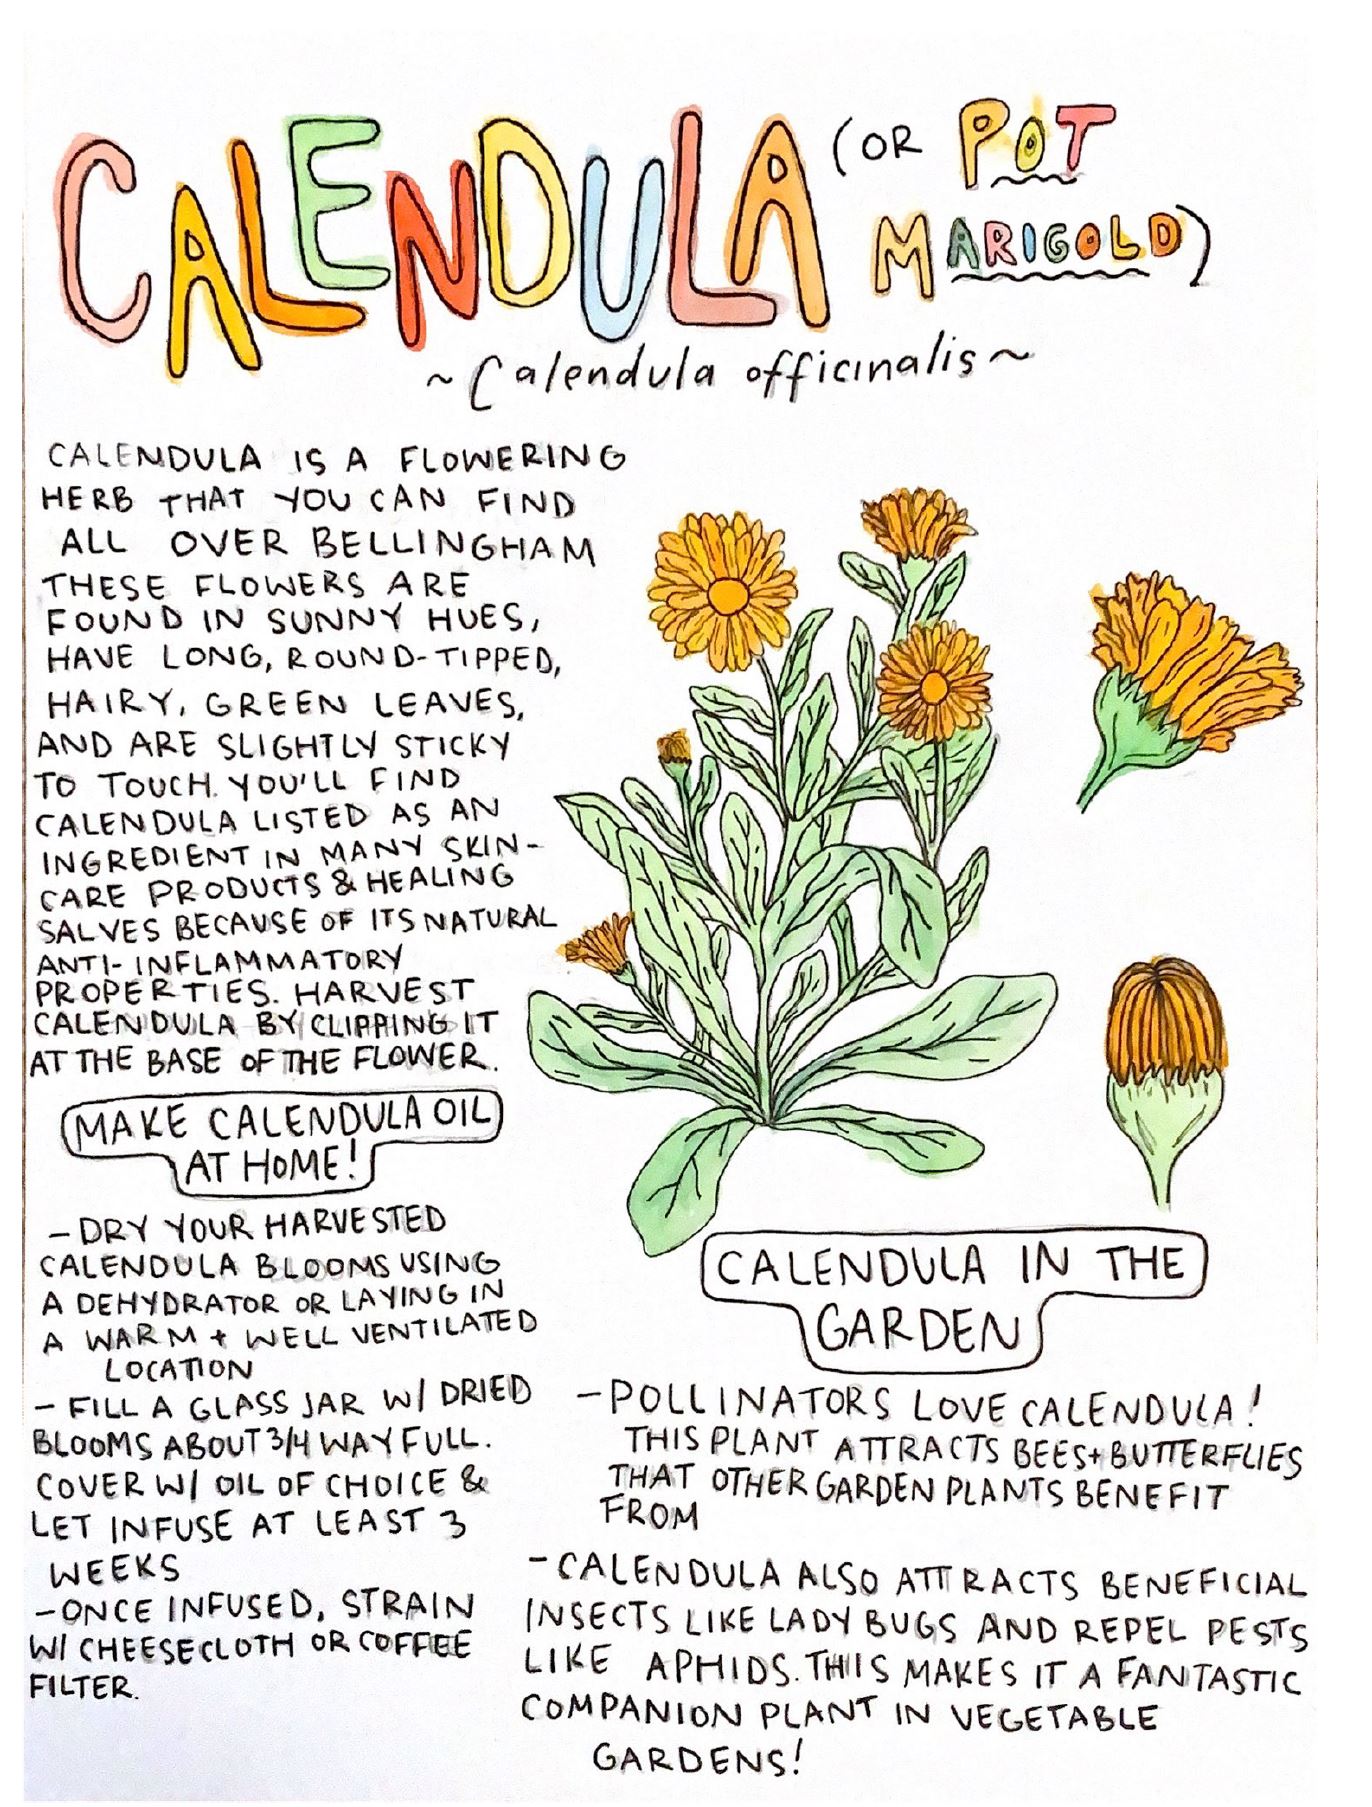 A document describing Calendula and it uses